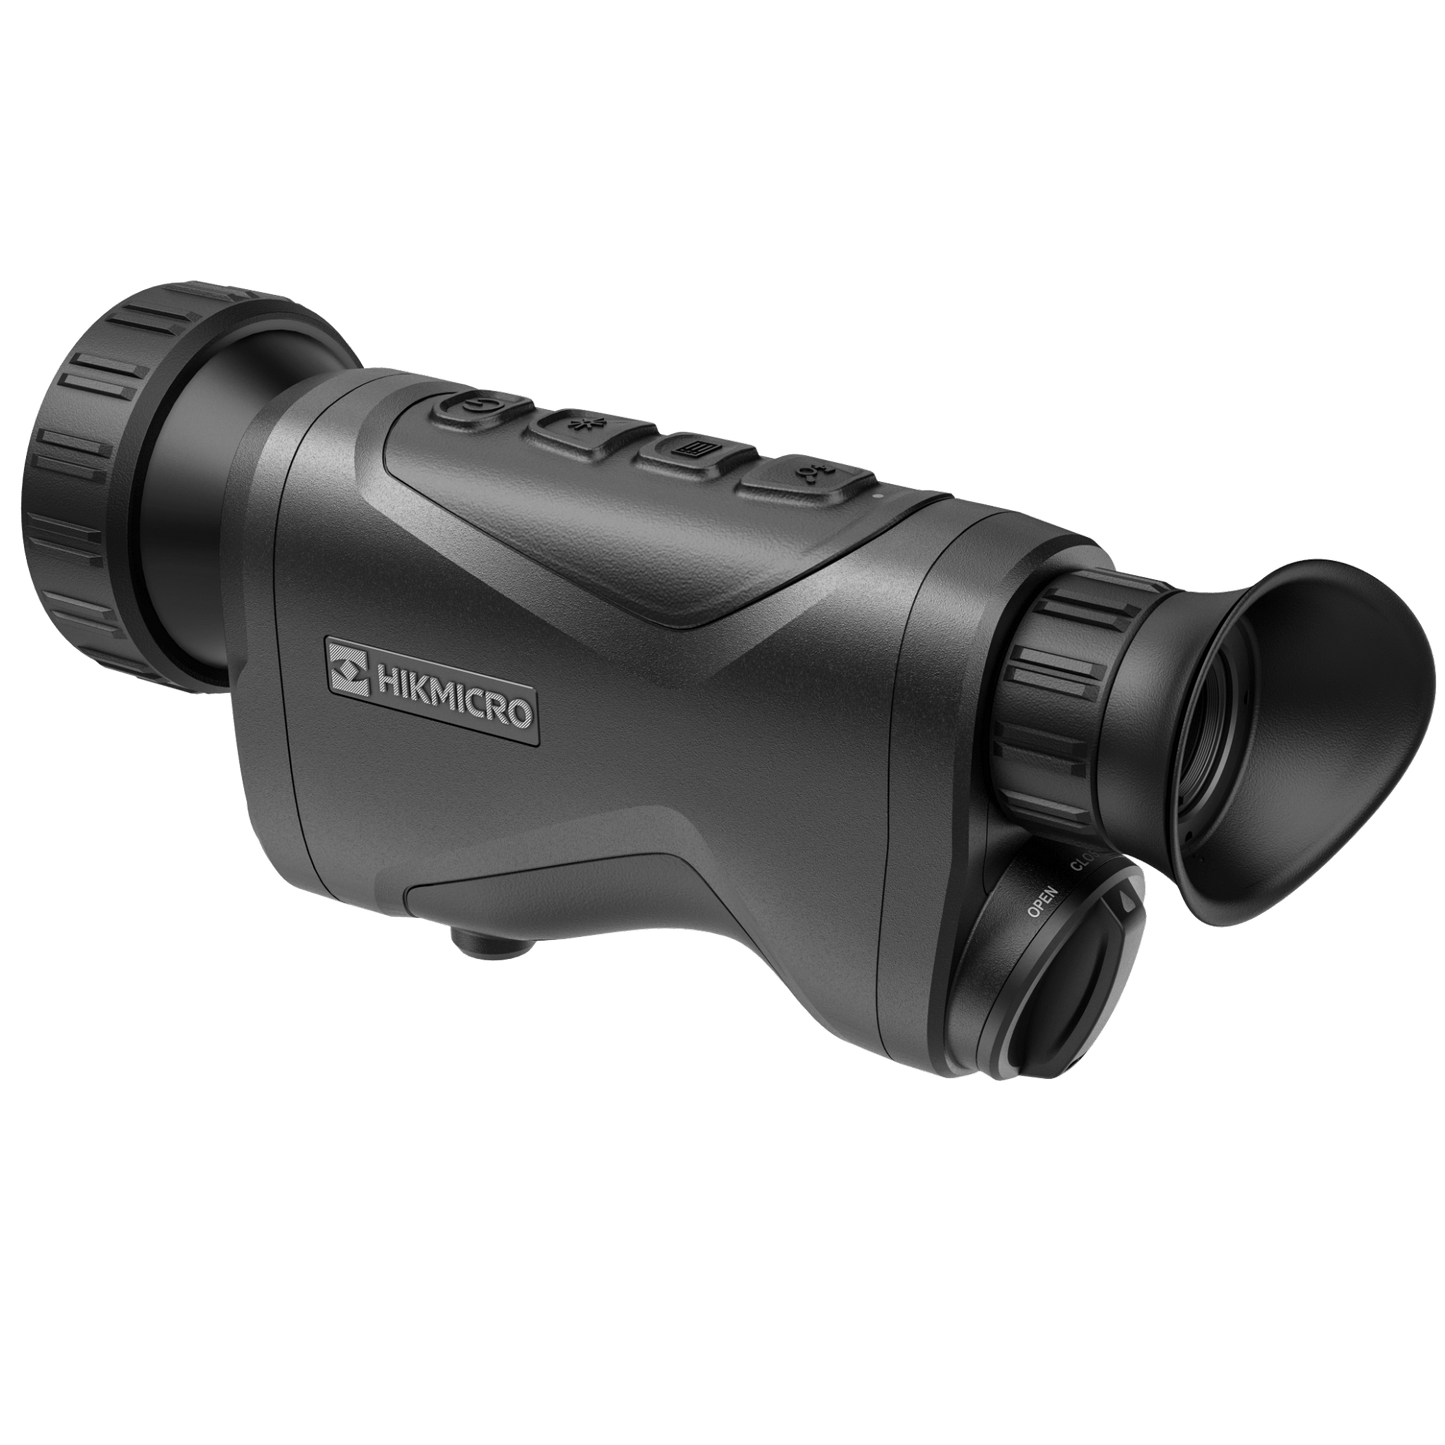 Rear view of the HikMicro Condor CQ50L thermal monocular, showcasing its detailed eyepiece and battery compartment. Designed for optimal performance in hunting, as well as security and surveillance. Recognized as one of the top thermal monoculars with an integrated rangefinder.